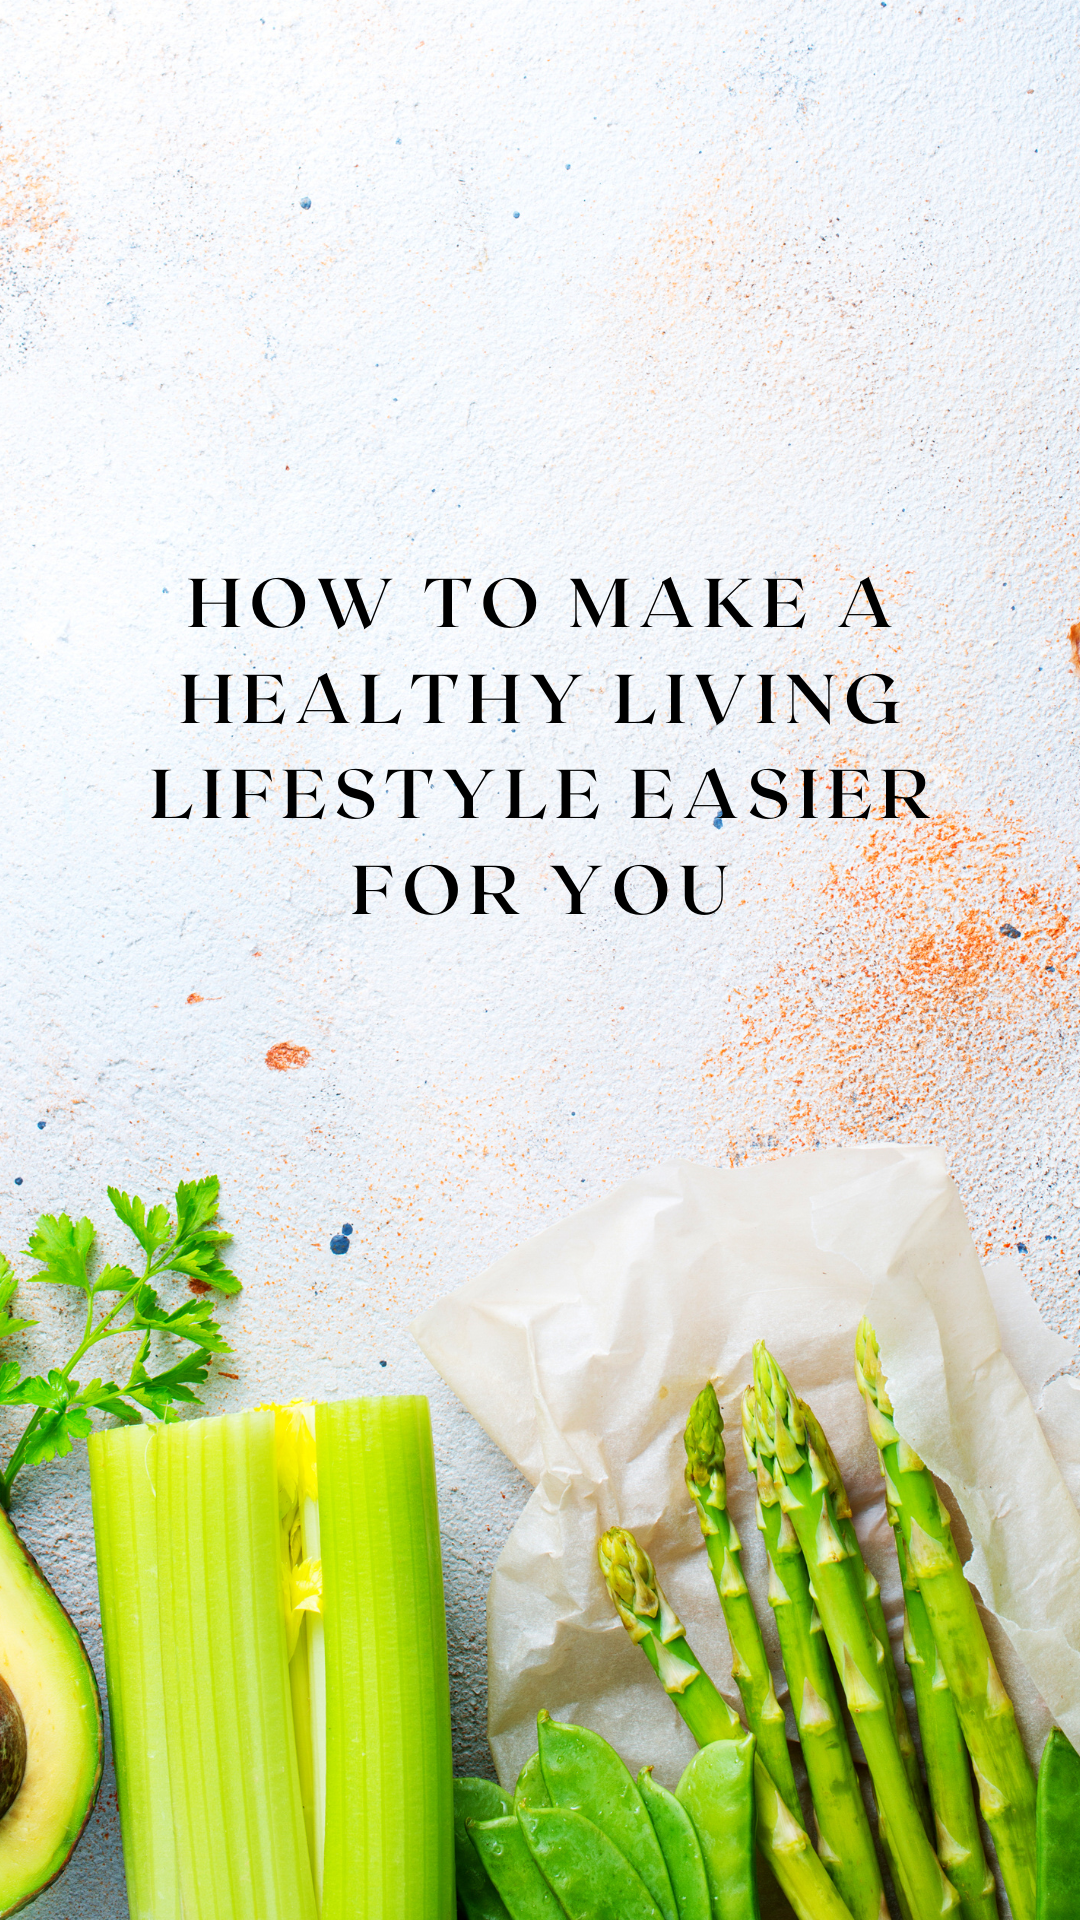 How to Make a Healthy Living Lifestyle Easier for You